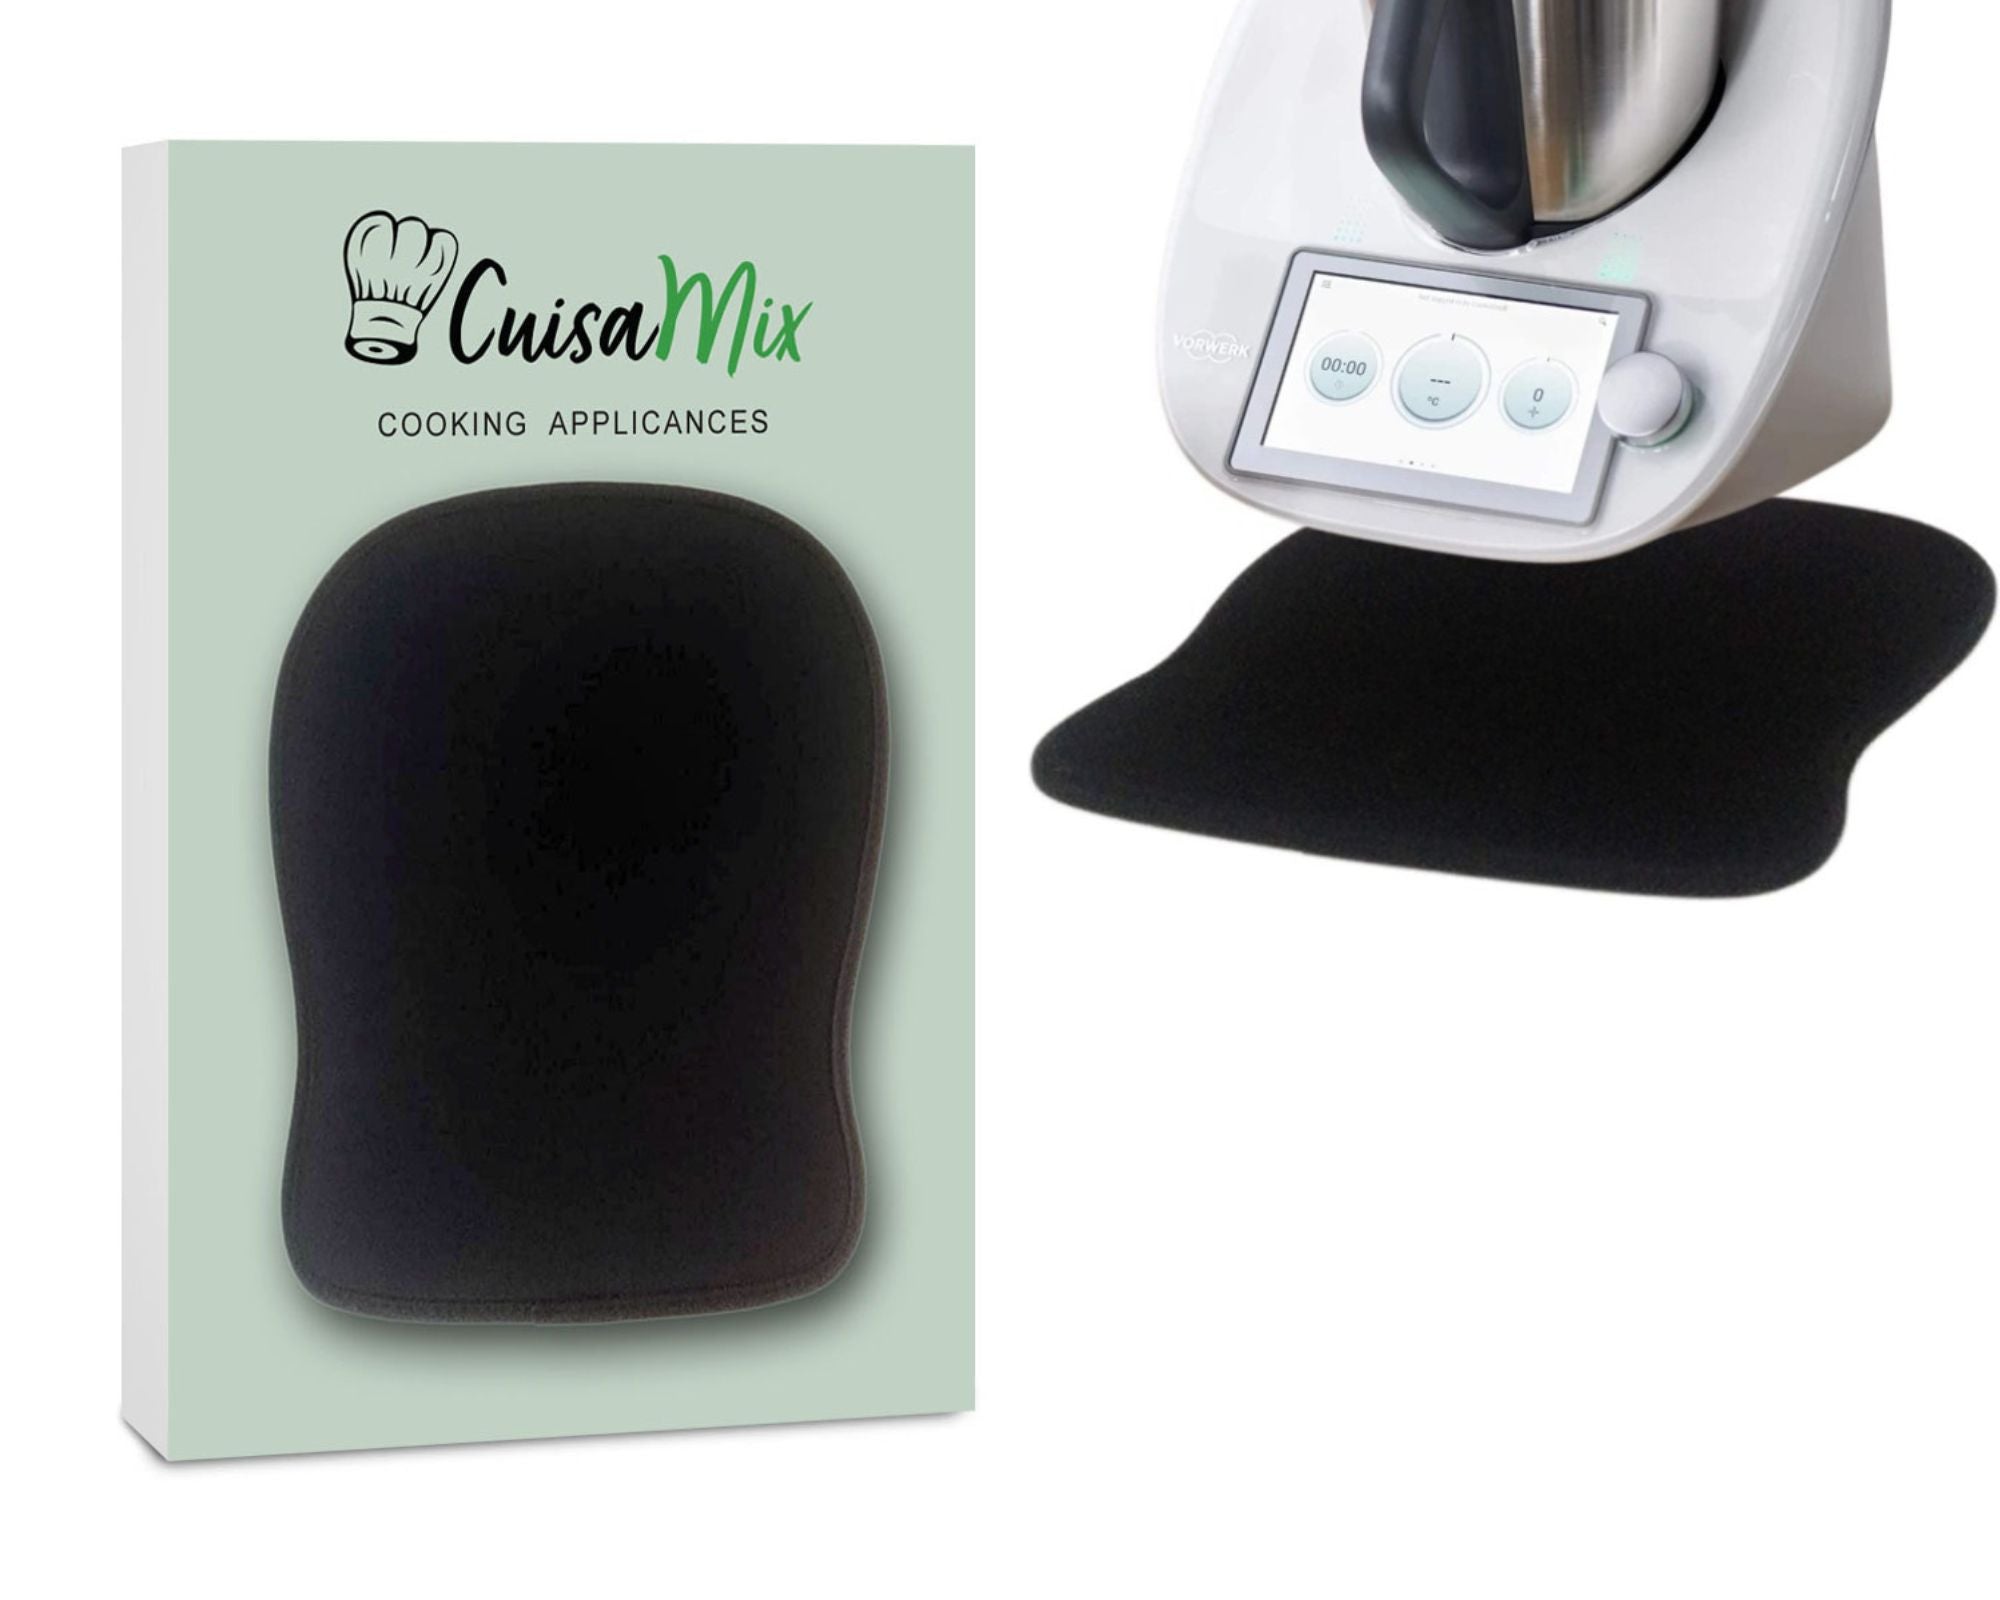 Planix - Sliding board for Thermomix